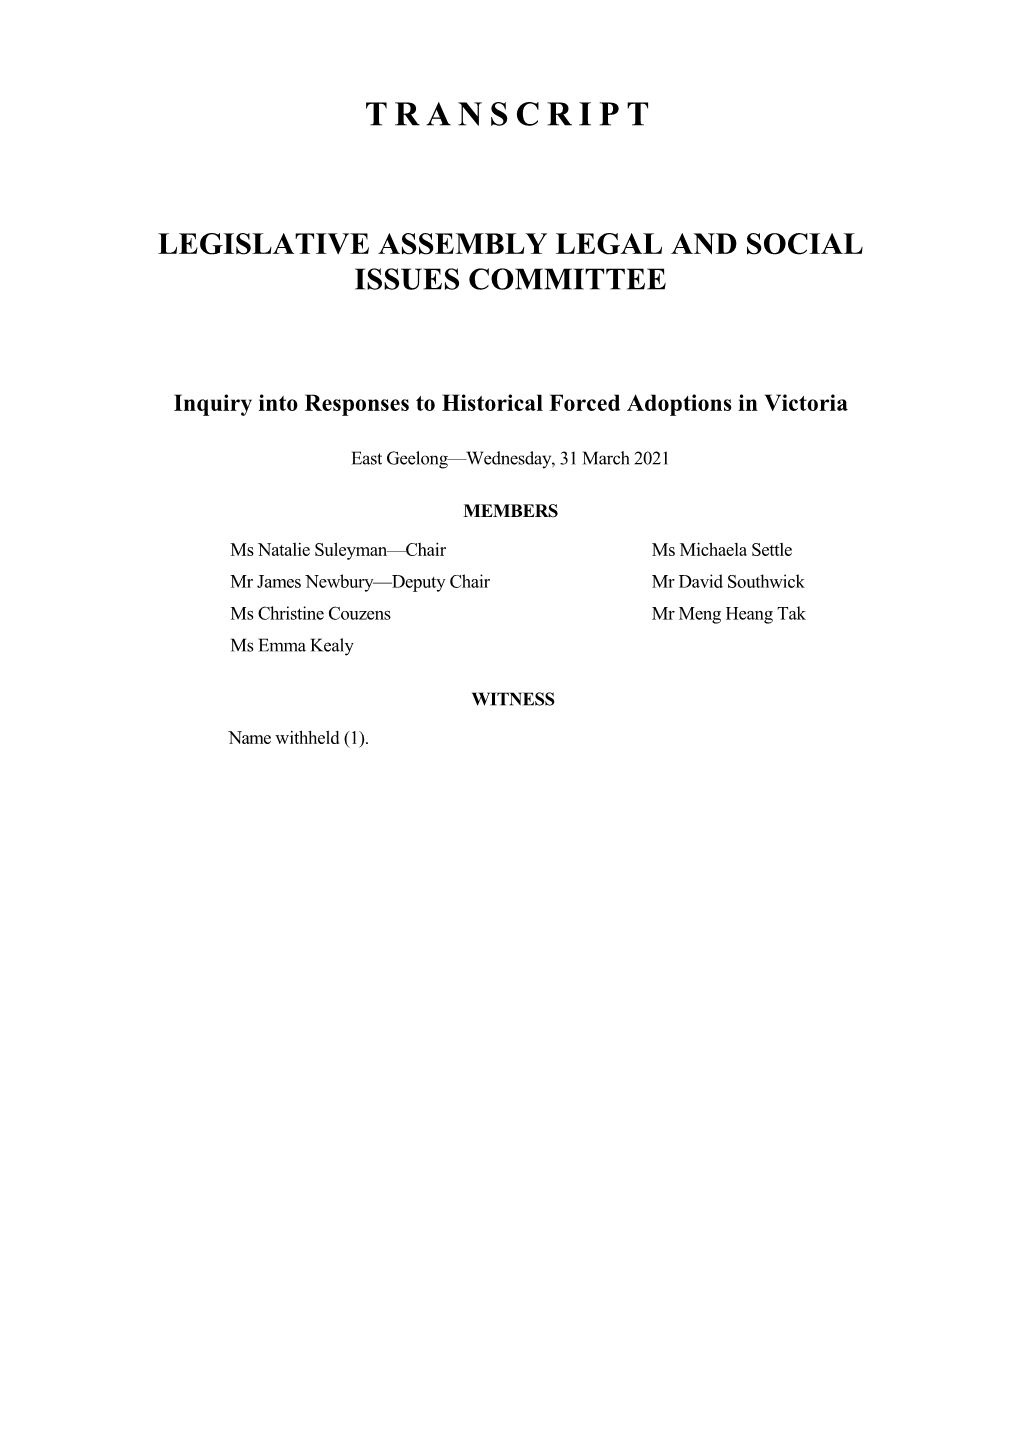 Transcript Legislative Assembly Legal and Social Issues Committee